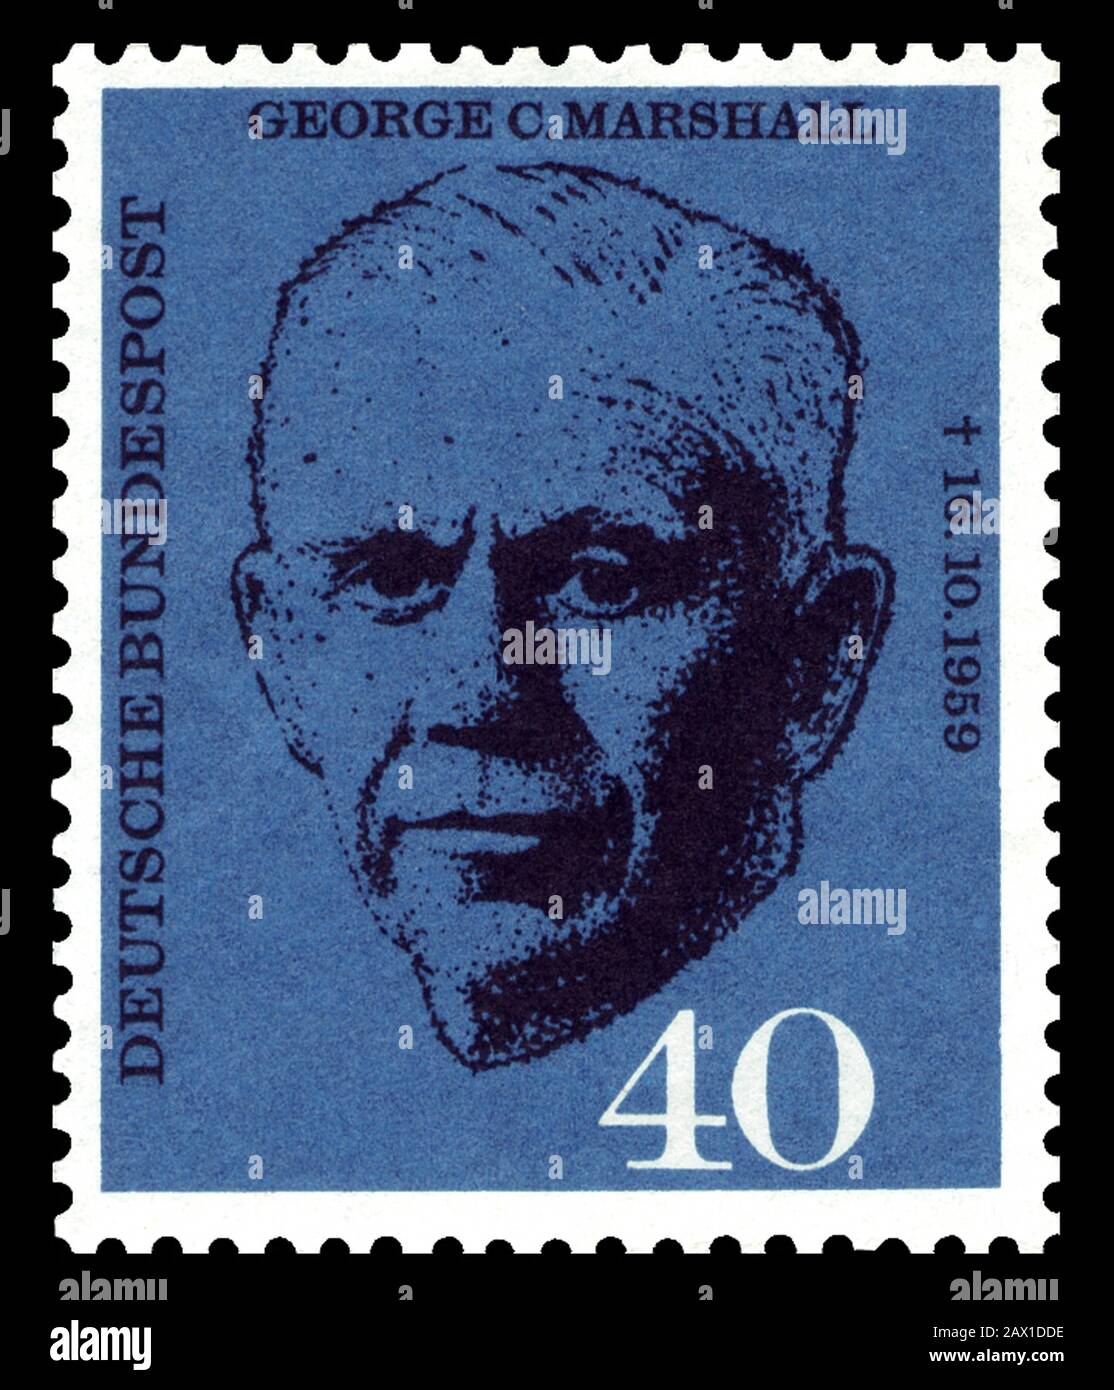 1960 , Germany :  German post stamp dedicated to USA General George Catlett Marshall ( 1880 – 1959 ).  As Secretary of State, his name was given to the Marshall Plan, for which he was awarded the Nobel Peace Prize in 1953 .-  FOTO STORICHE - HISTORY  -  PIANO MARSHALL - RICOSTRUZIONE DALLA SECONDA GUERRA MONDIALE - WW2nd - WWII - WORLD WAR - ritratto - portrait  - PREMIO NOBEL PER LA PACE - GENERALE - GENERAL -  francobollo - valore postale - GERMANIA OVEST - GERMANY   ----    Archivio GBB Stock Photo